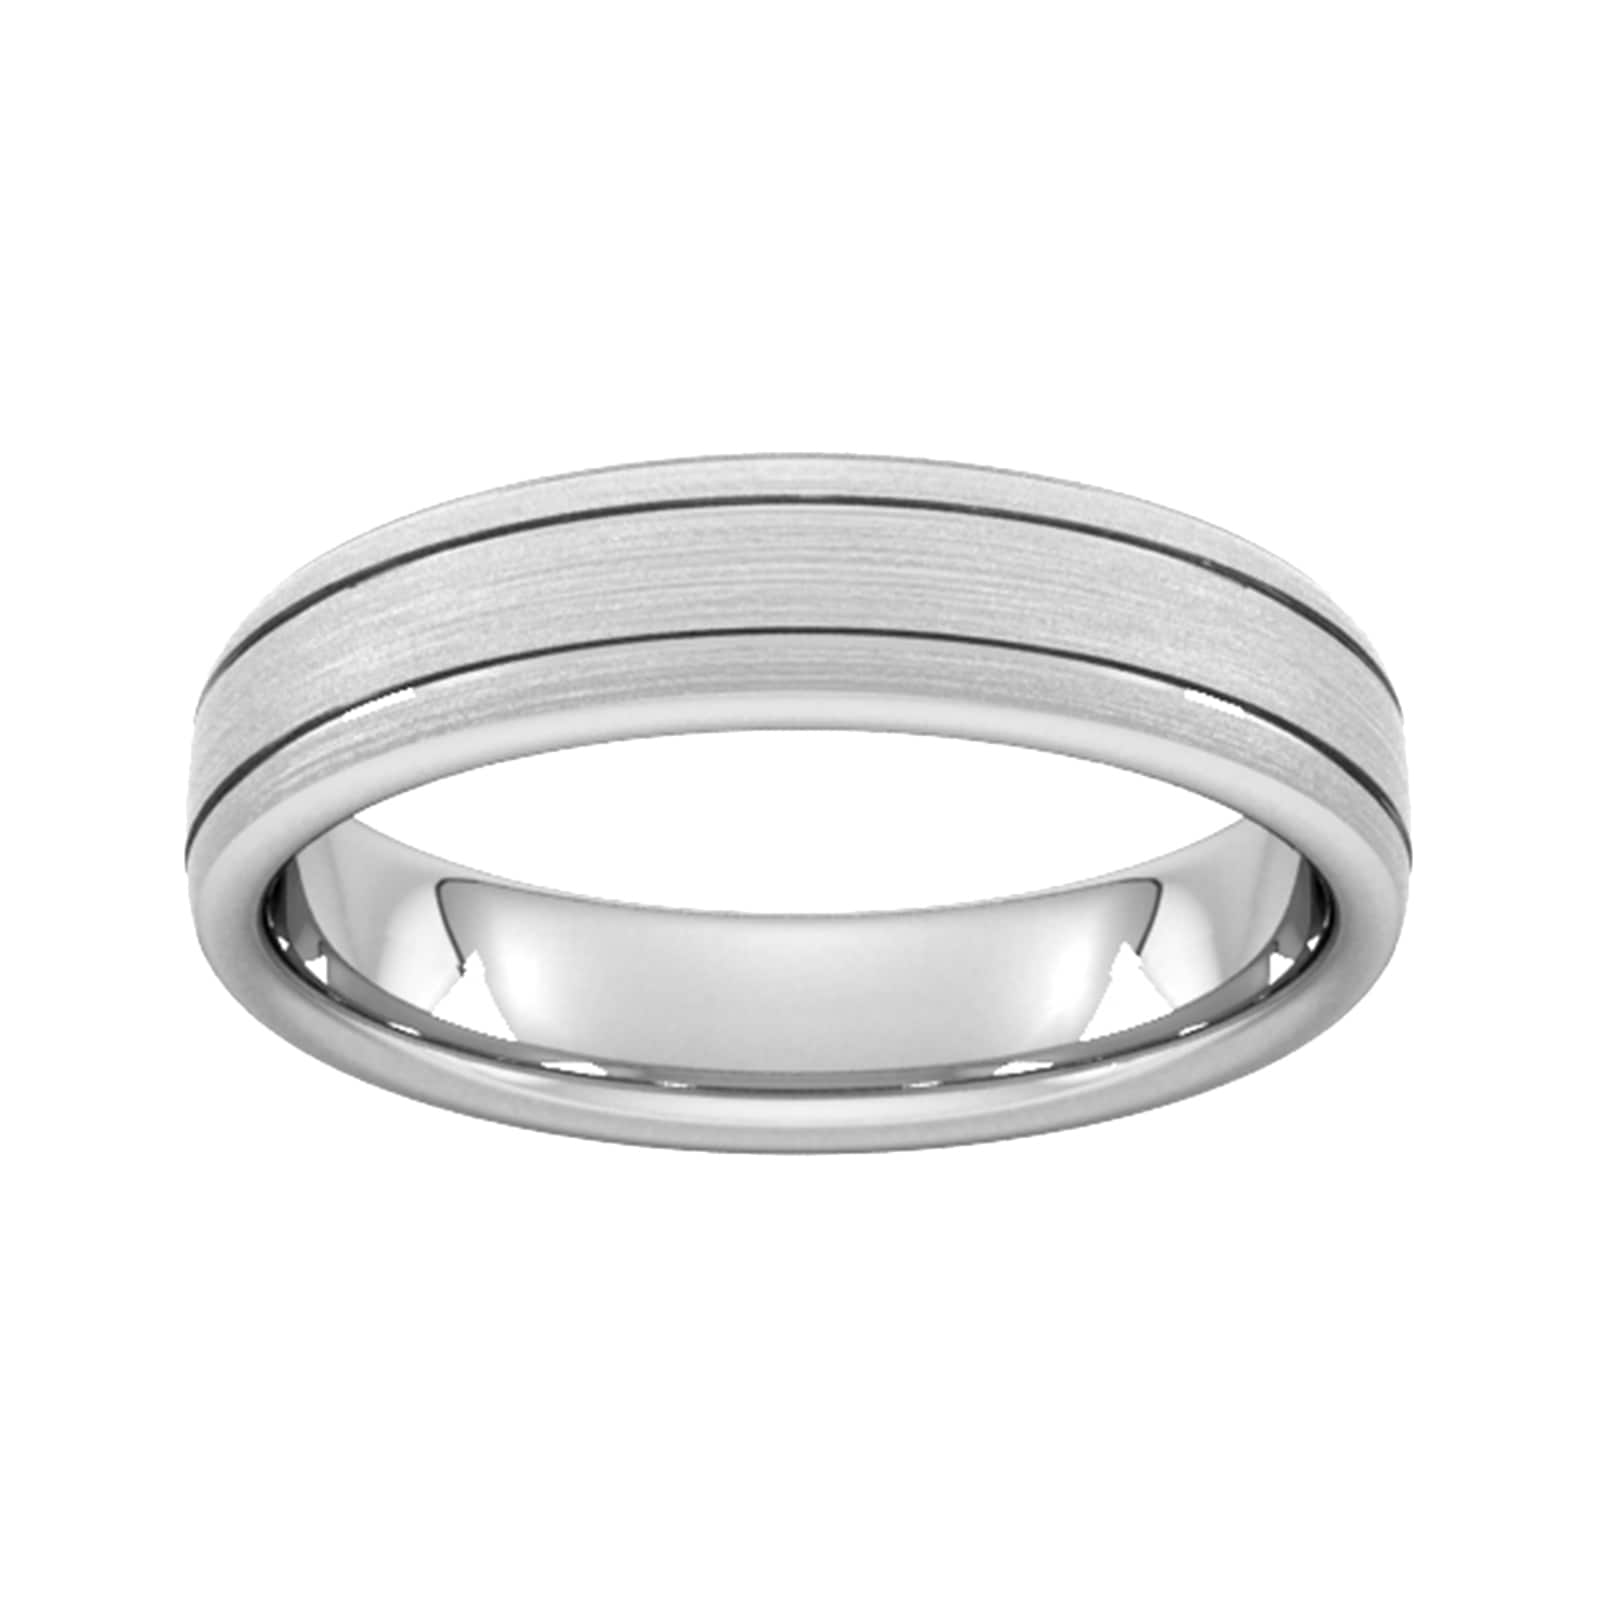 5mm Slight Court Heavy Matt Finish With Double Grooves Wedding Ring In 950 Palladium - Ring Size W